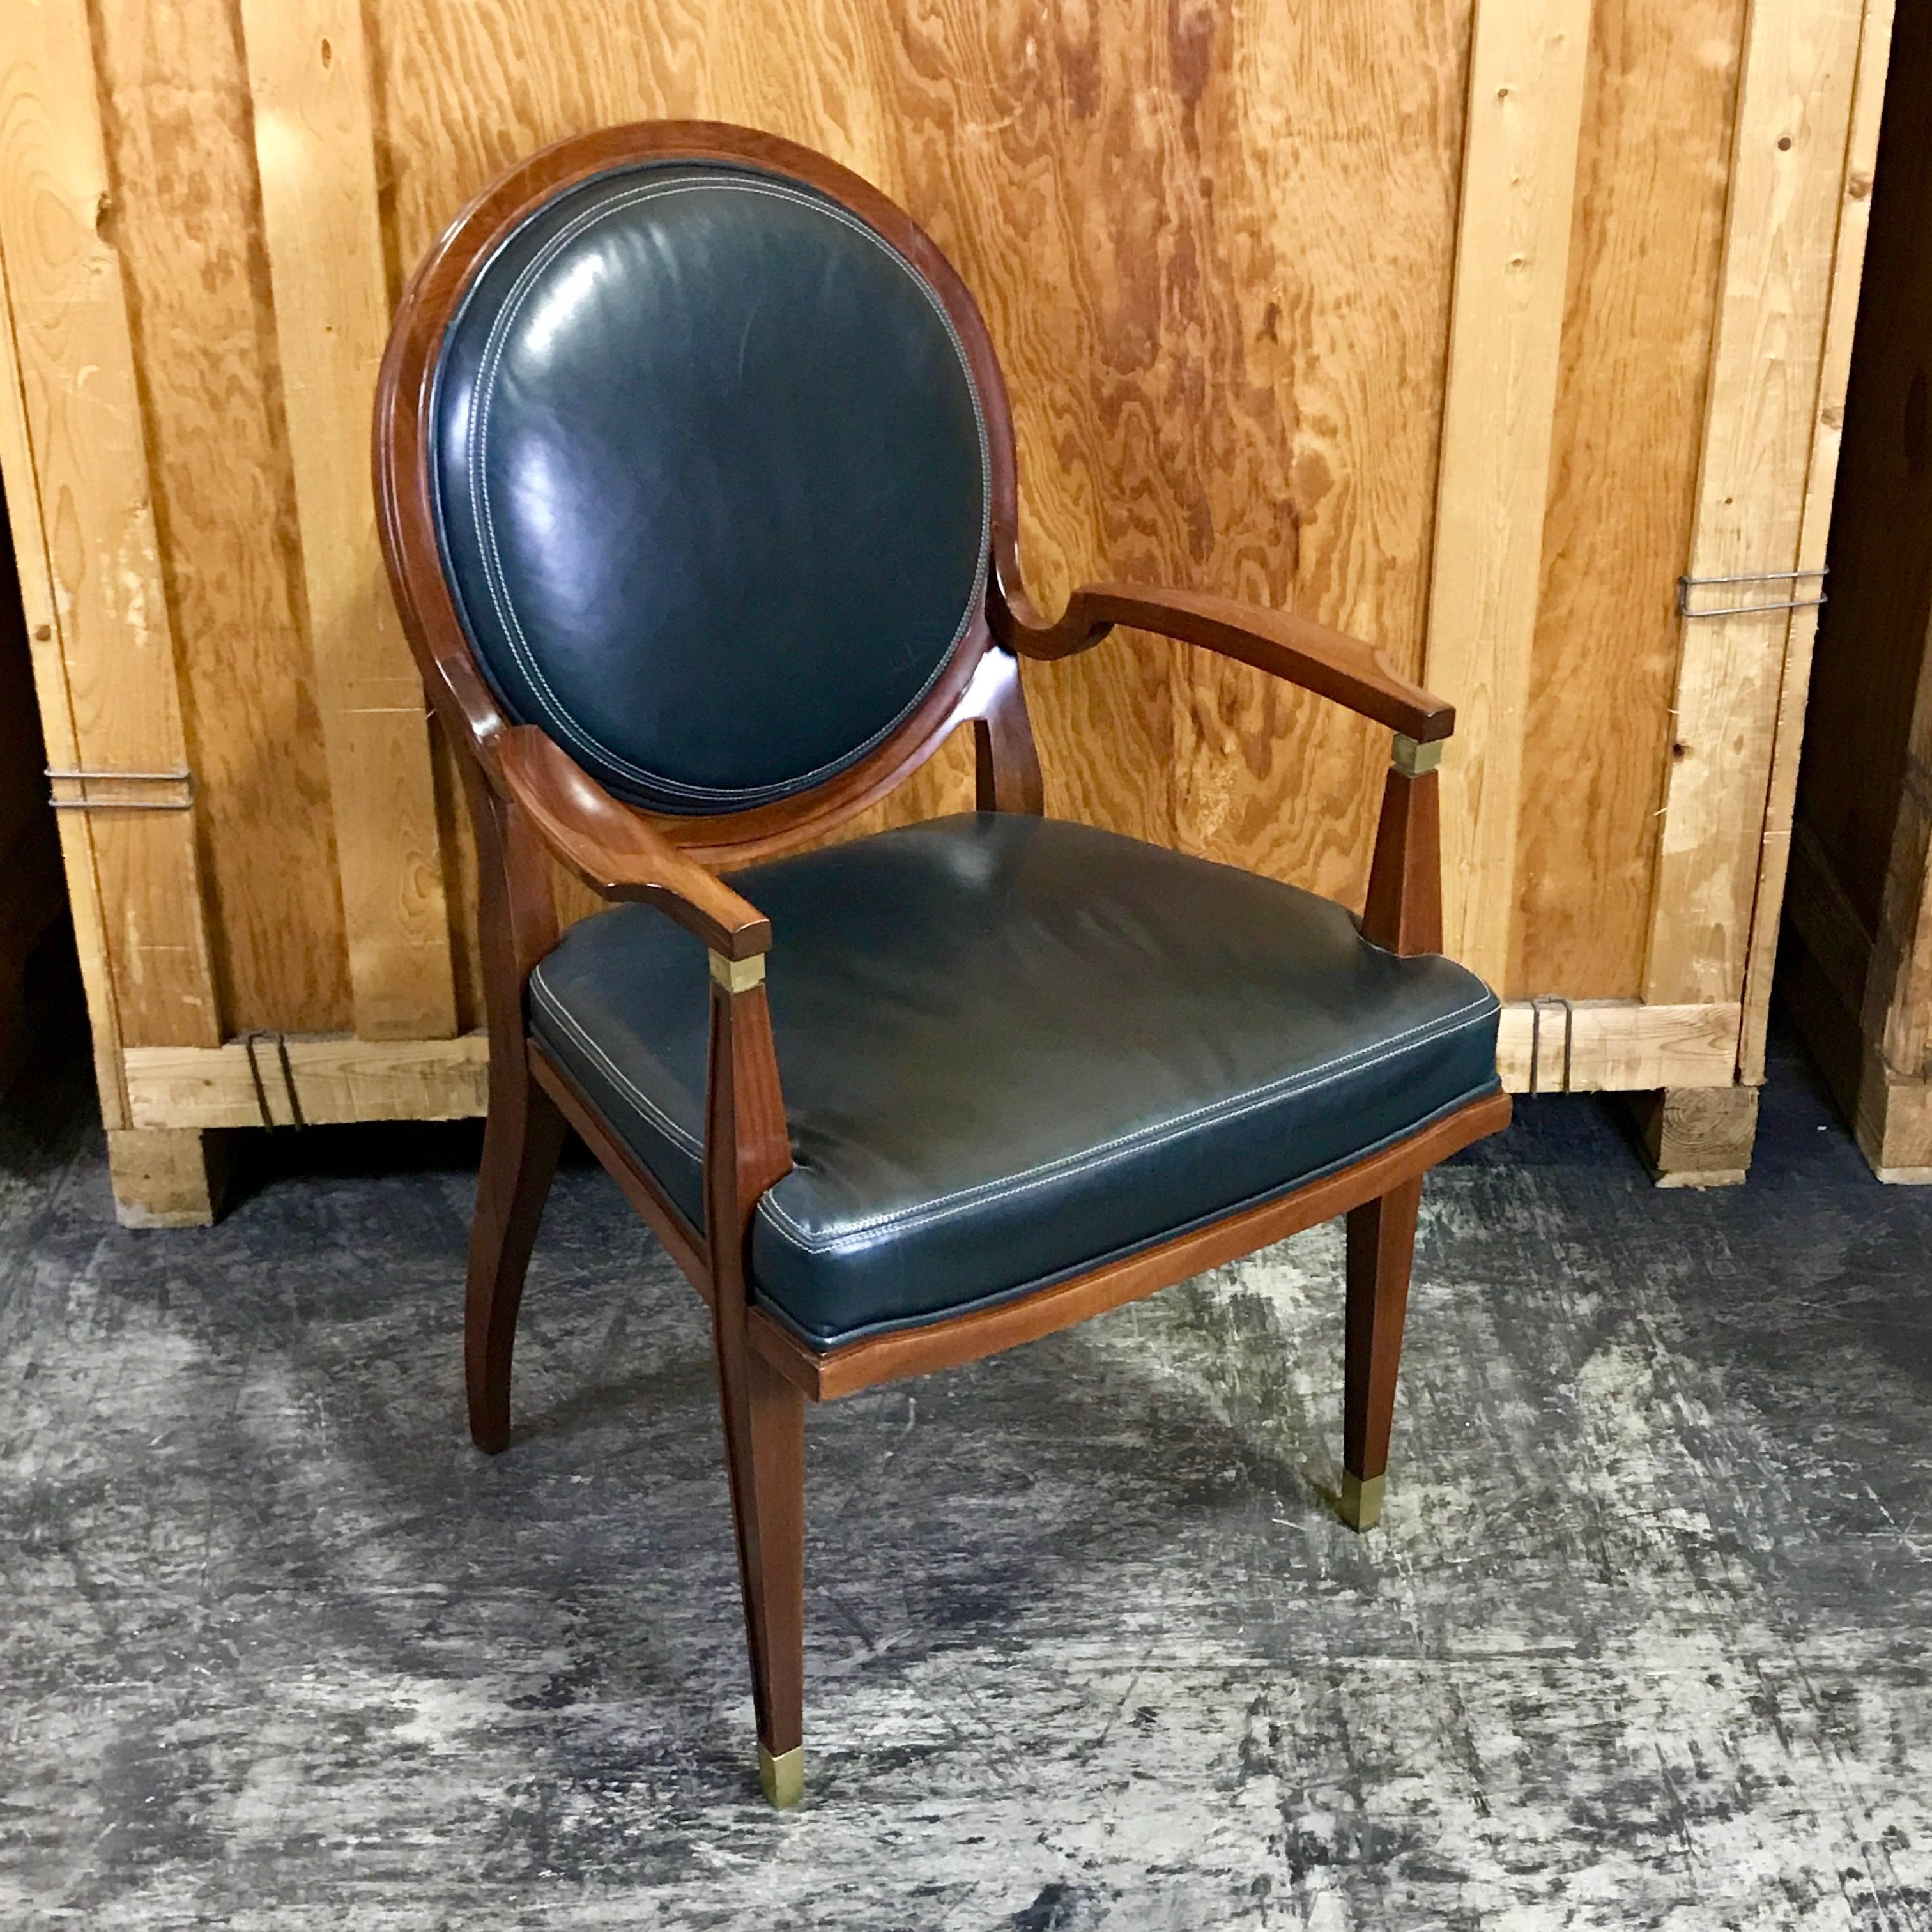 Beautiful leather armchair from the Lucien Rollin collection for William Switzer, with stitched black leather medallion backrest, brass-mounted carved arms. Conforming seat raised on brass sabot fitted front legs.